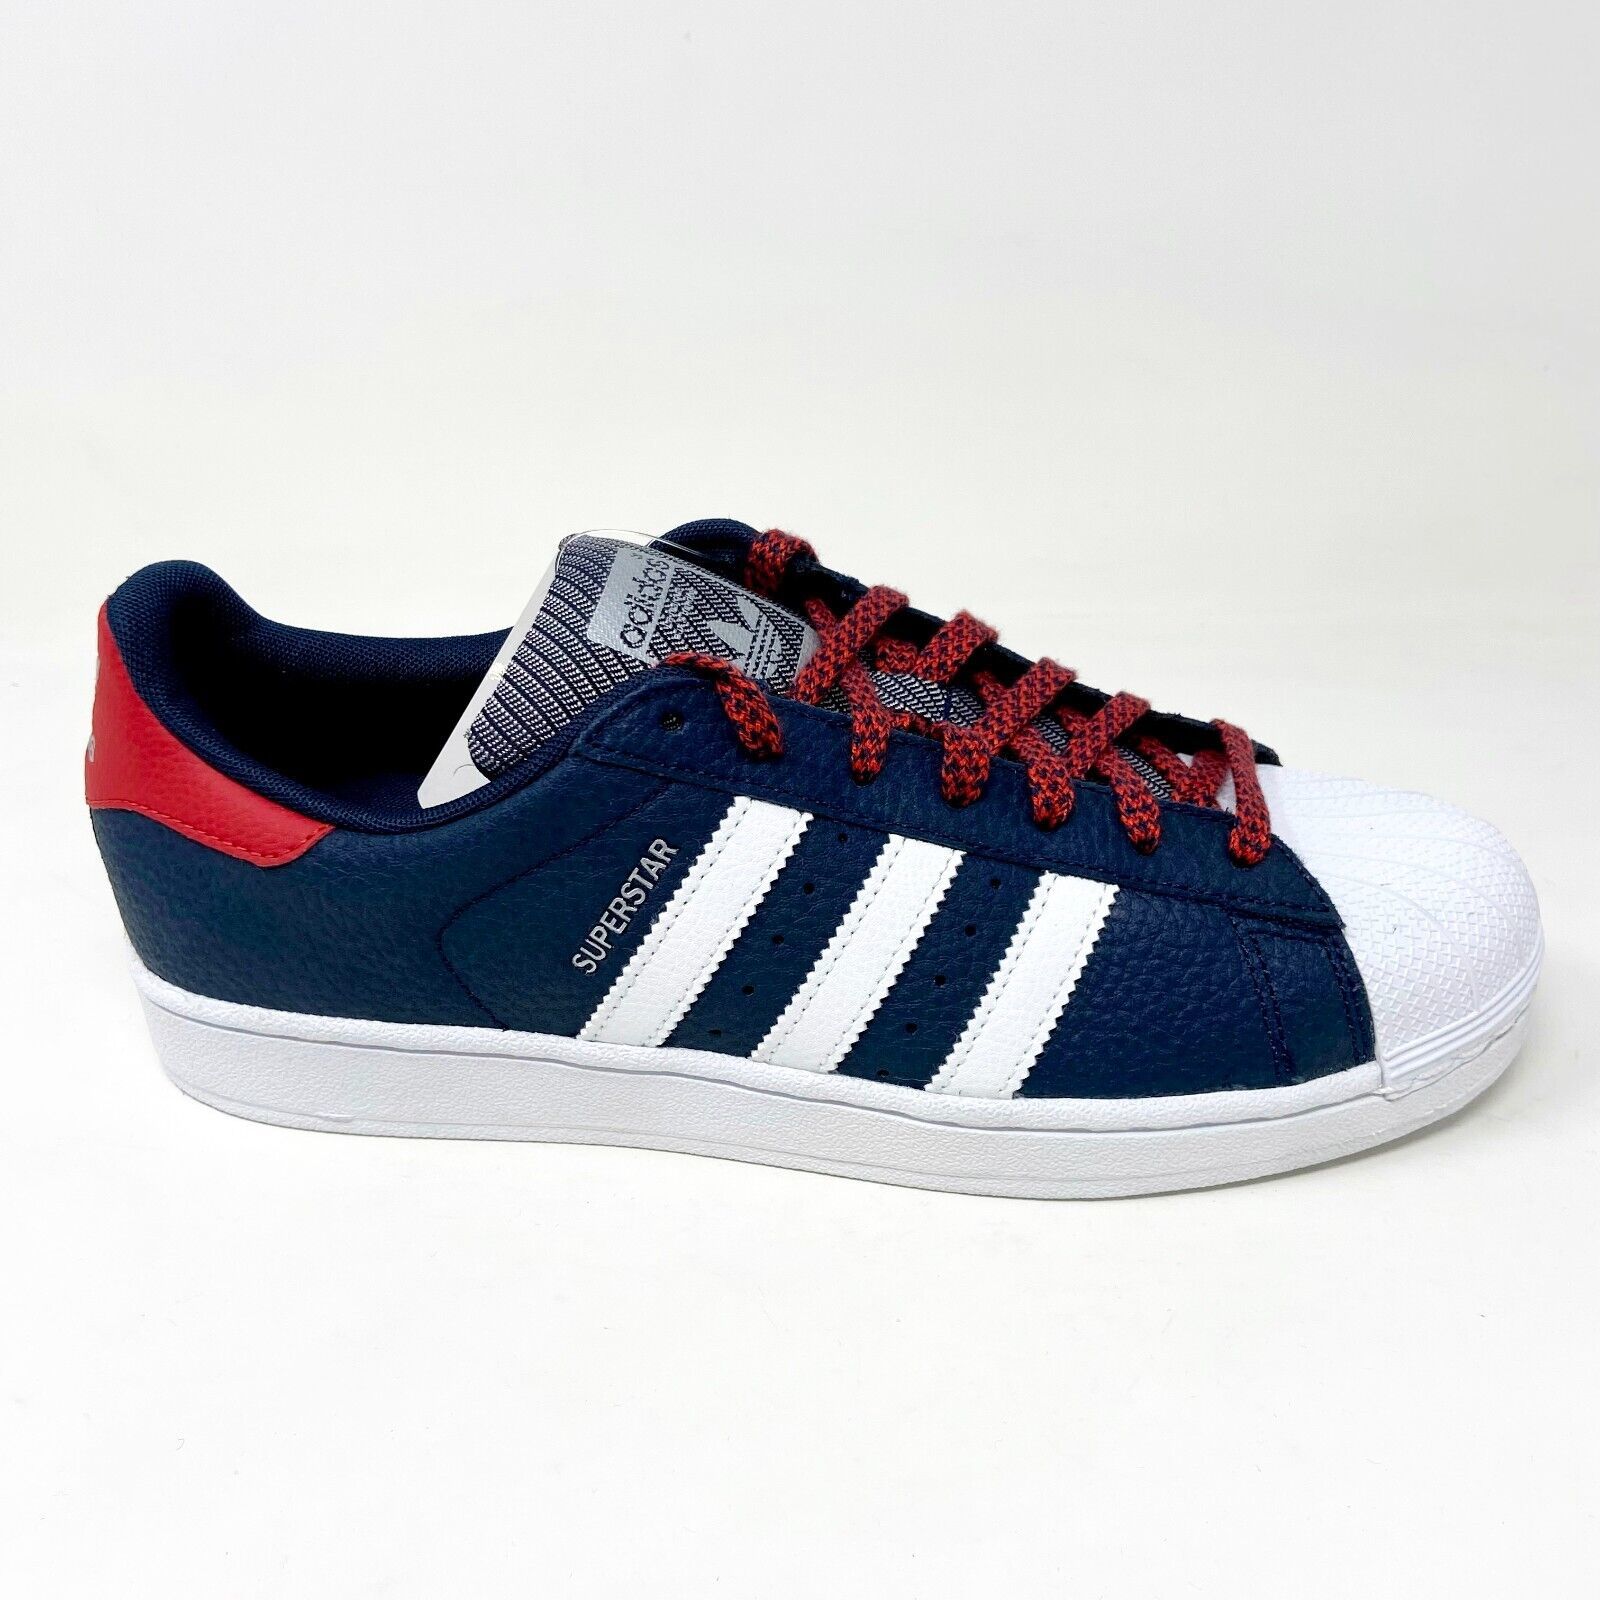 Adidas Originals Superstar NFL Pack Navy White Red Mens Leather Sneakers Q16709